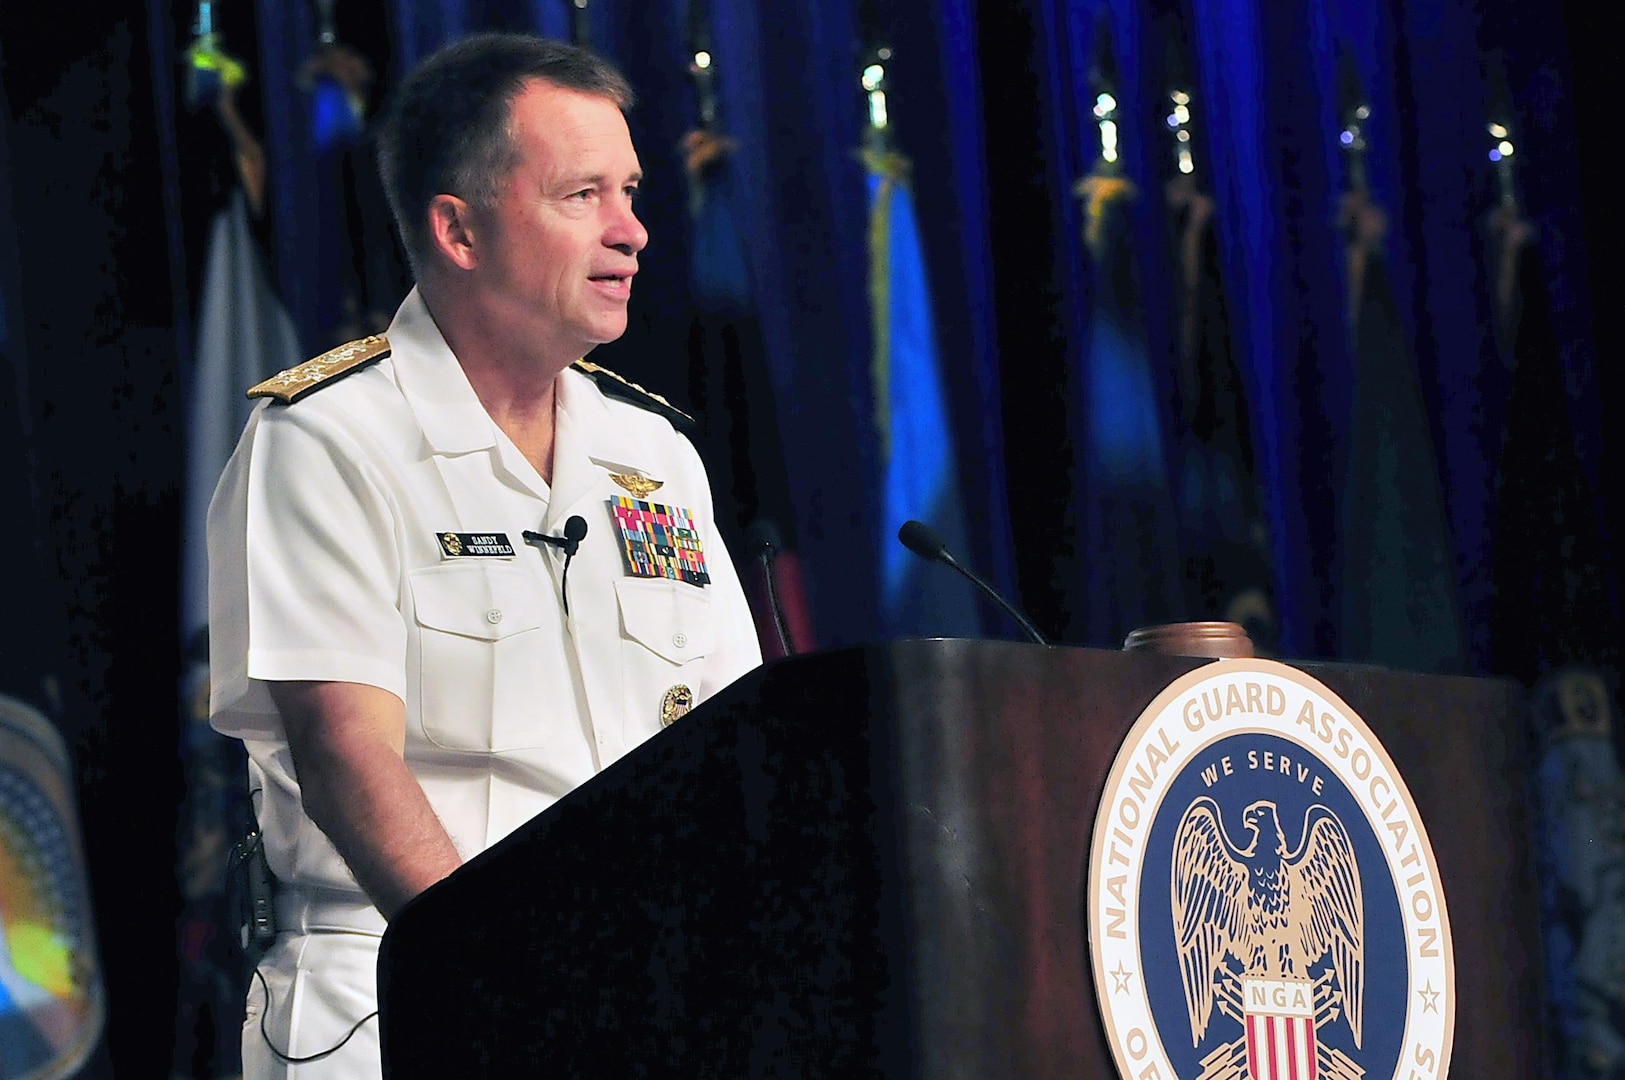 Navy Adm. James Winnefeld, ninth vice chairman of the Joint Chiefs of Staff, addresses an audience at the 133rd general conference of the National Guard Association of the United States in Milwaukee, Aug. 28, 2011.